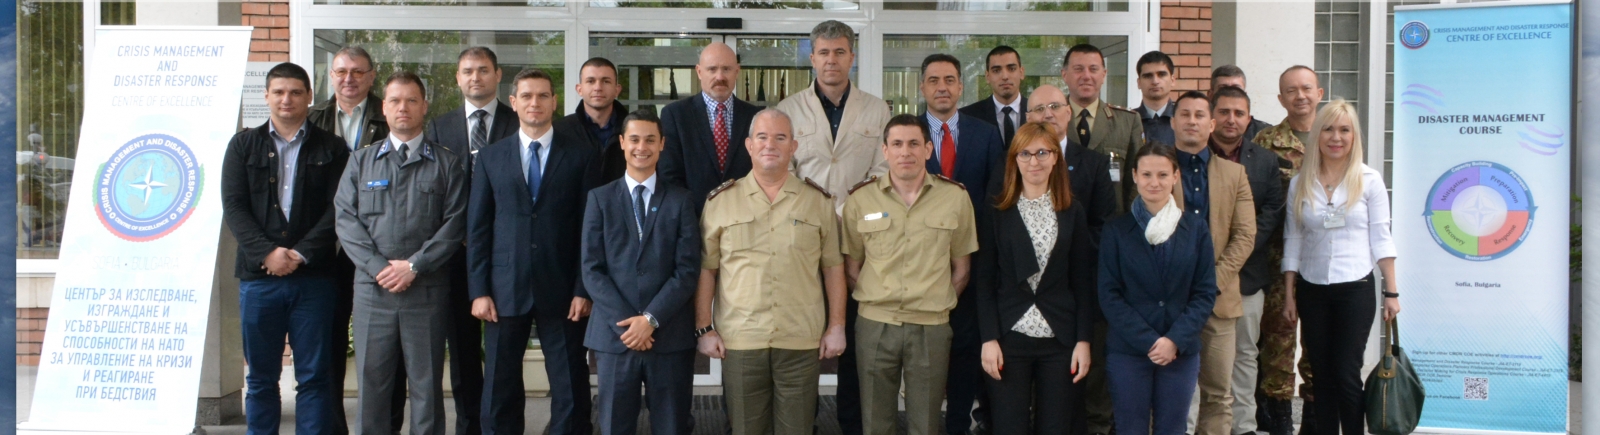 CMDR COE held the Disaster Management Course from 16 to 20 May 2016 in Sofia, Bulgaria. 